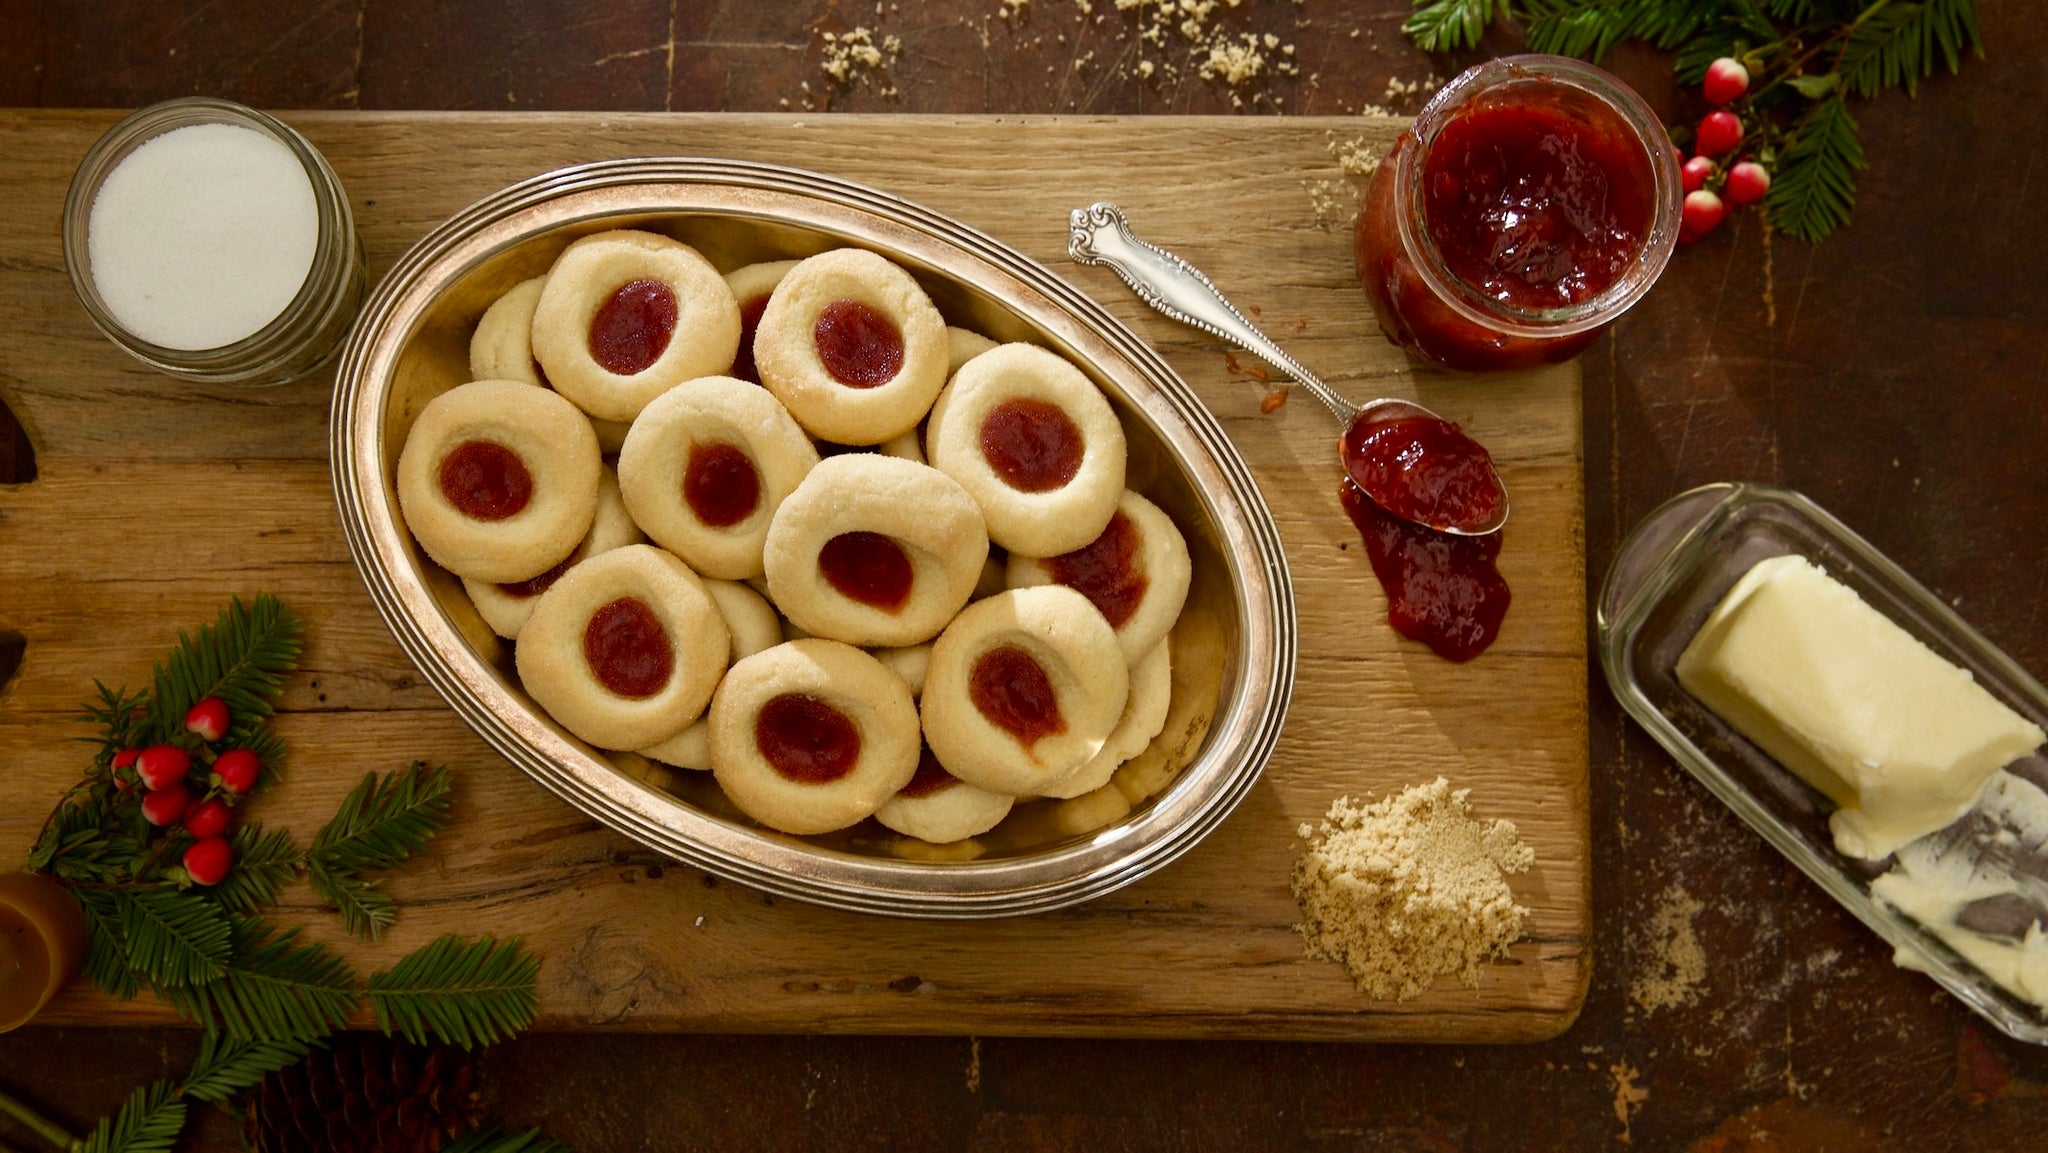 Butter Thumbprint Cookies with Jam Filling